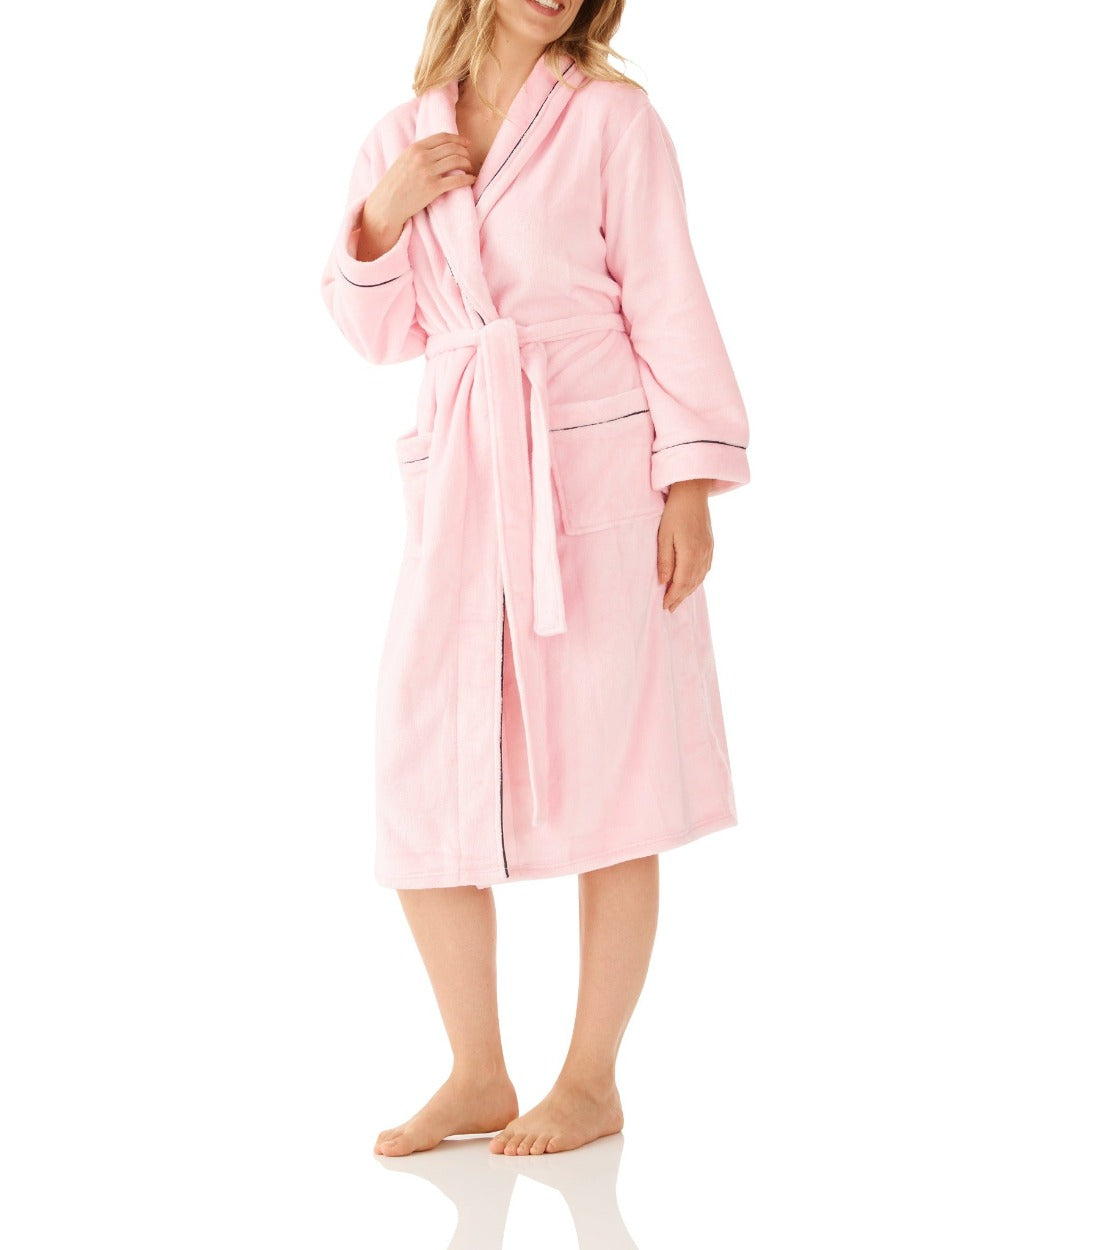 Pink Shawl Collar Fleece Dressing Gown with Piping Magnolia Lounge